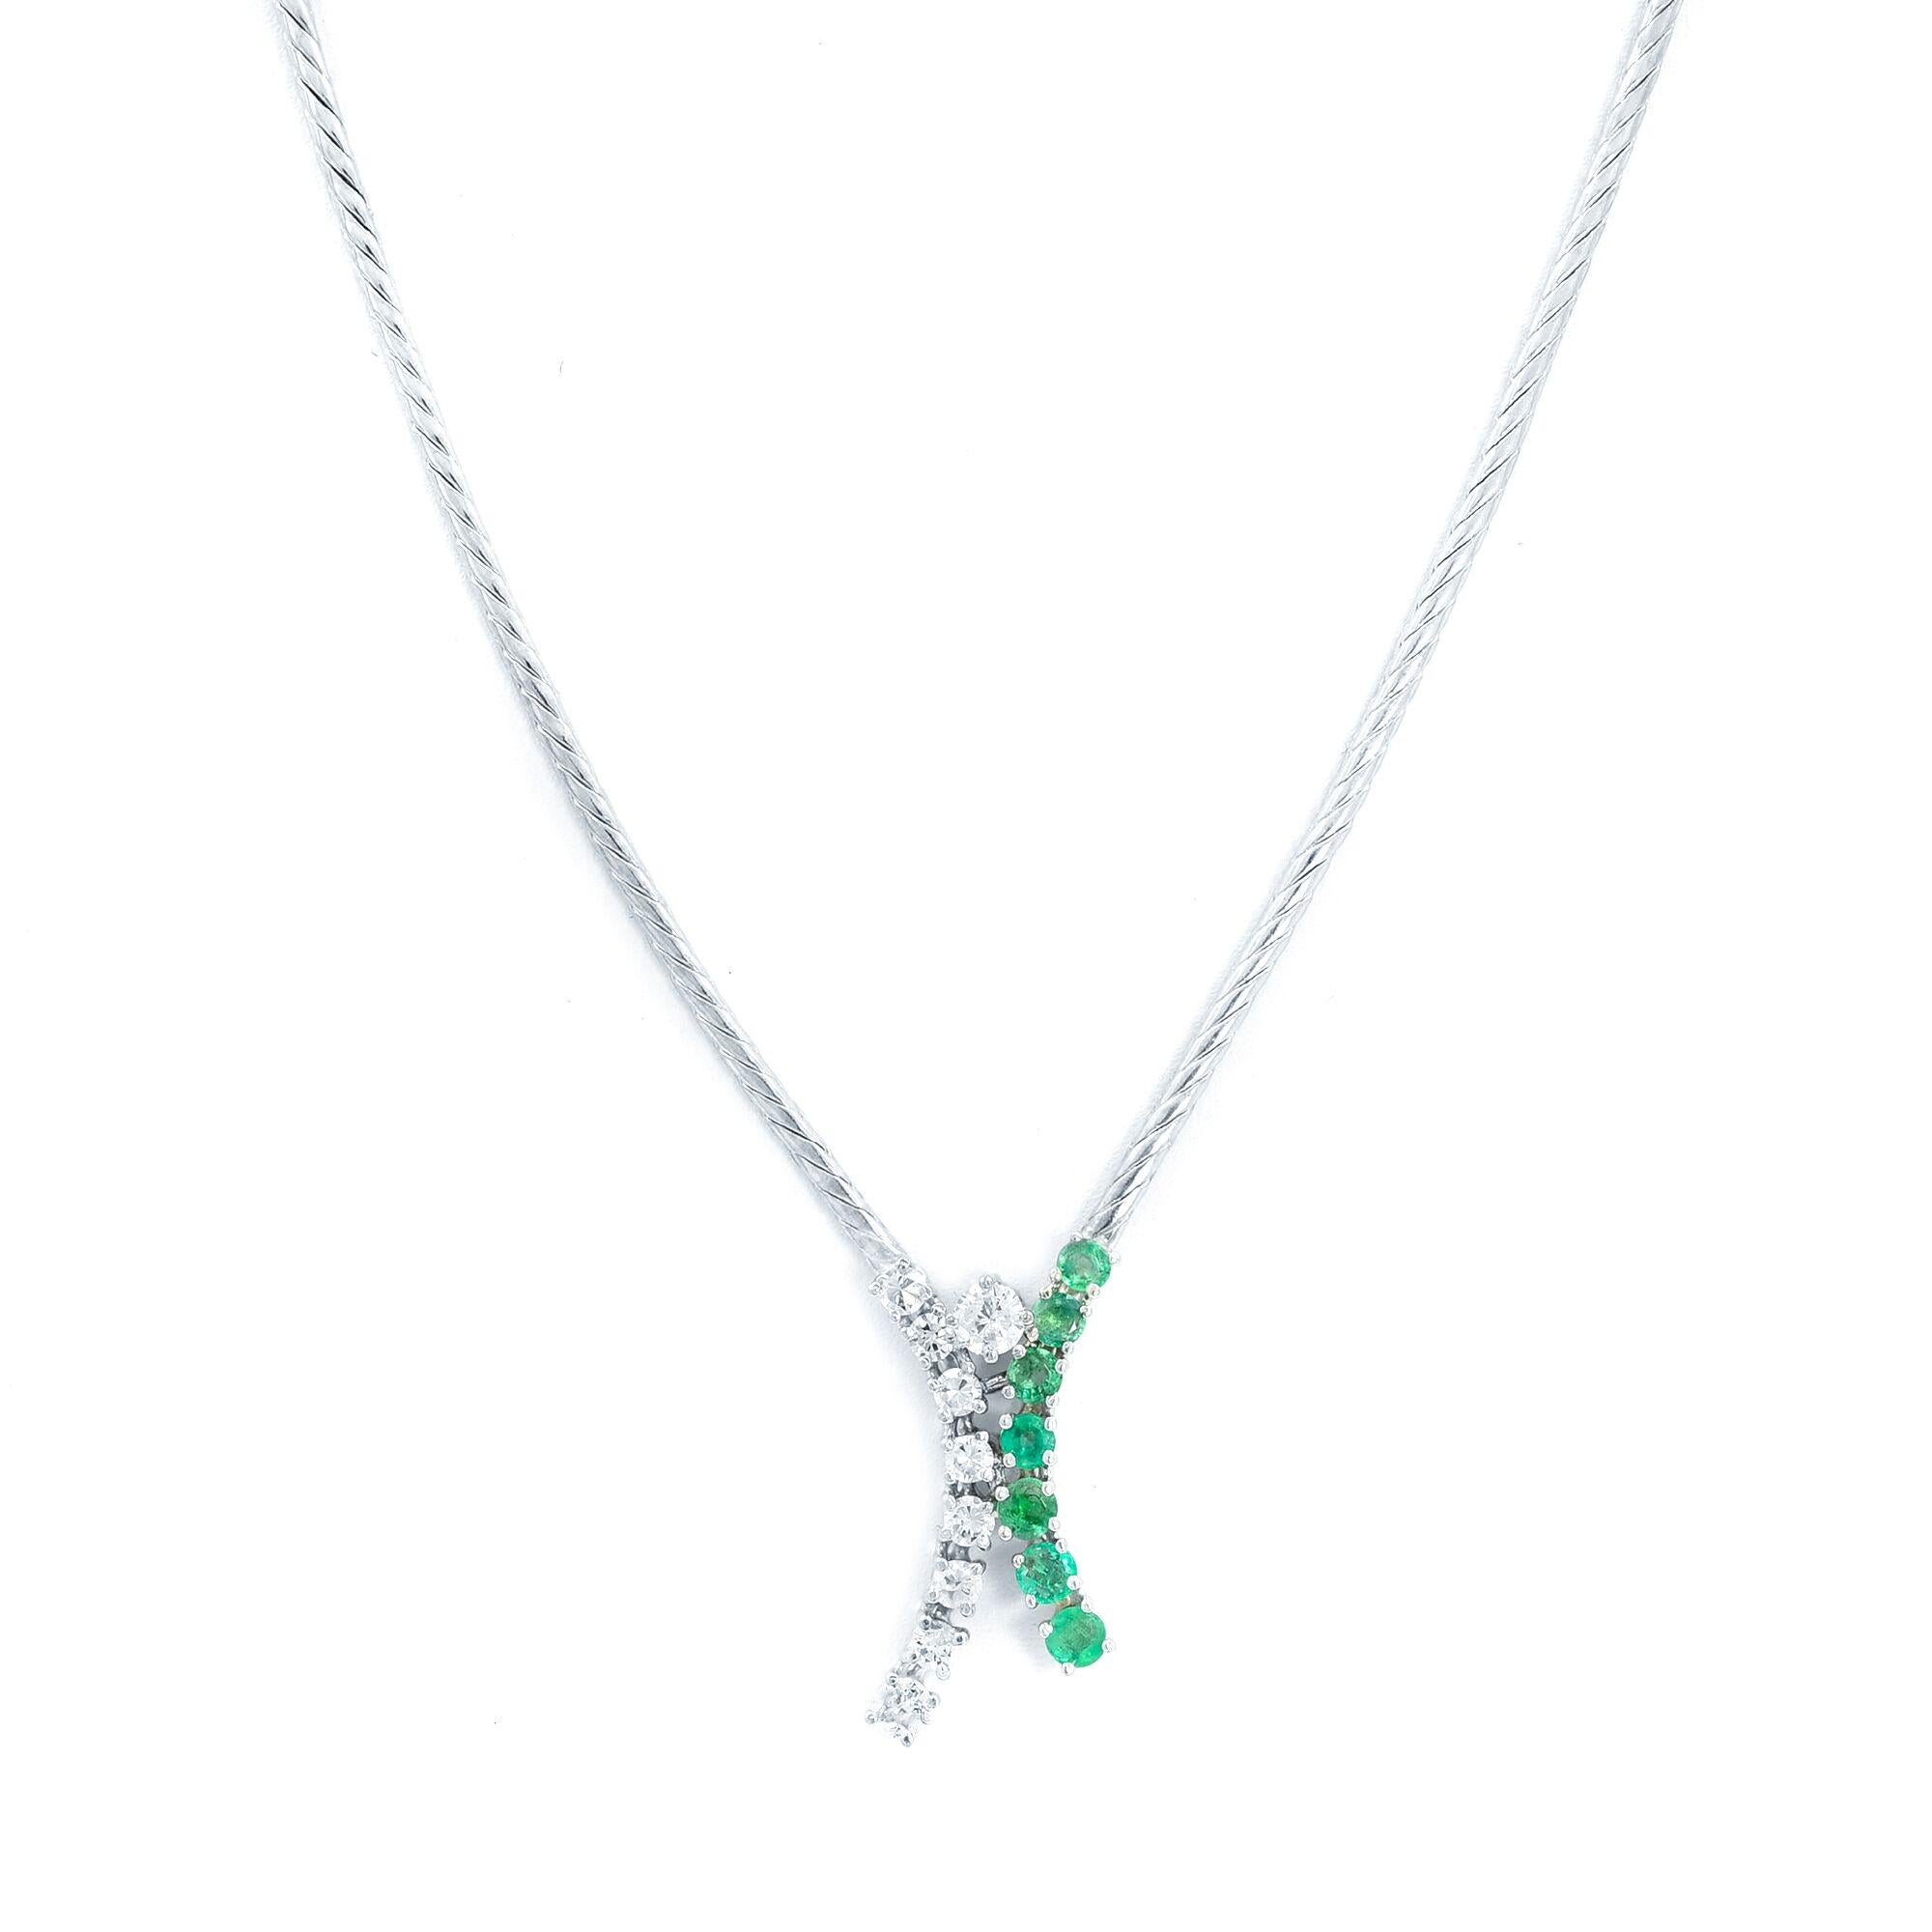 Chic and Trendy diamond emerald necklace hand fabricated in 14k white gold. This necklace features prong set 7 round cut emeralds with 9 round cut diamonds. Chain length: 16 inches. Comes with a presentable gift box.